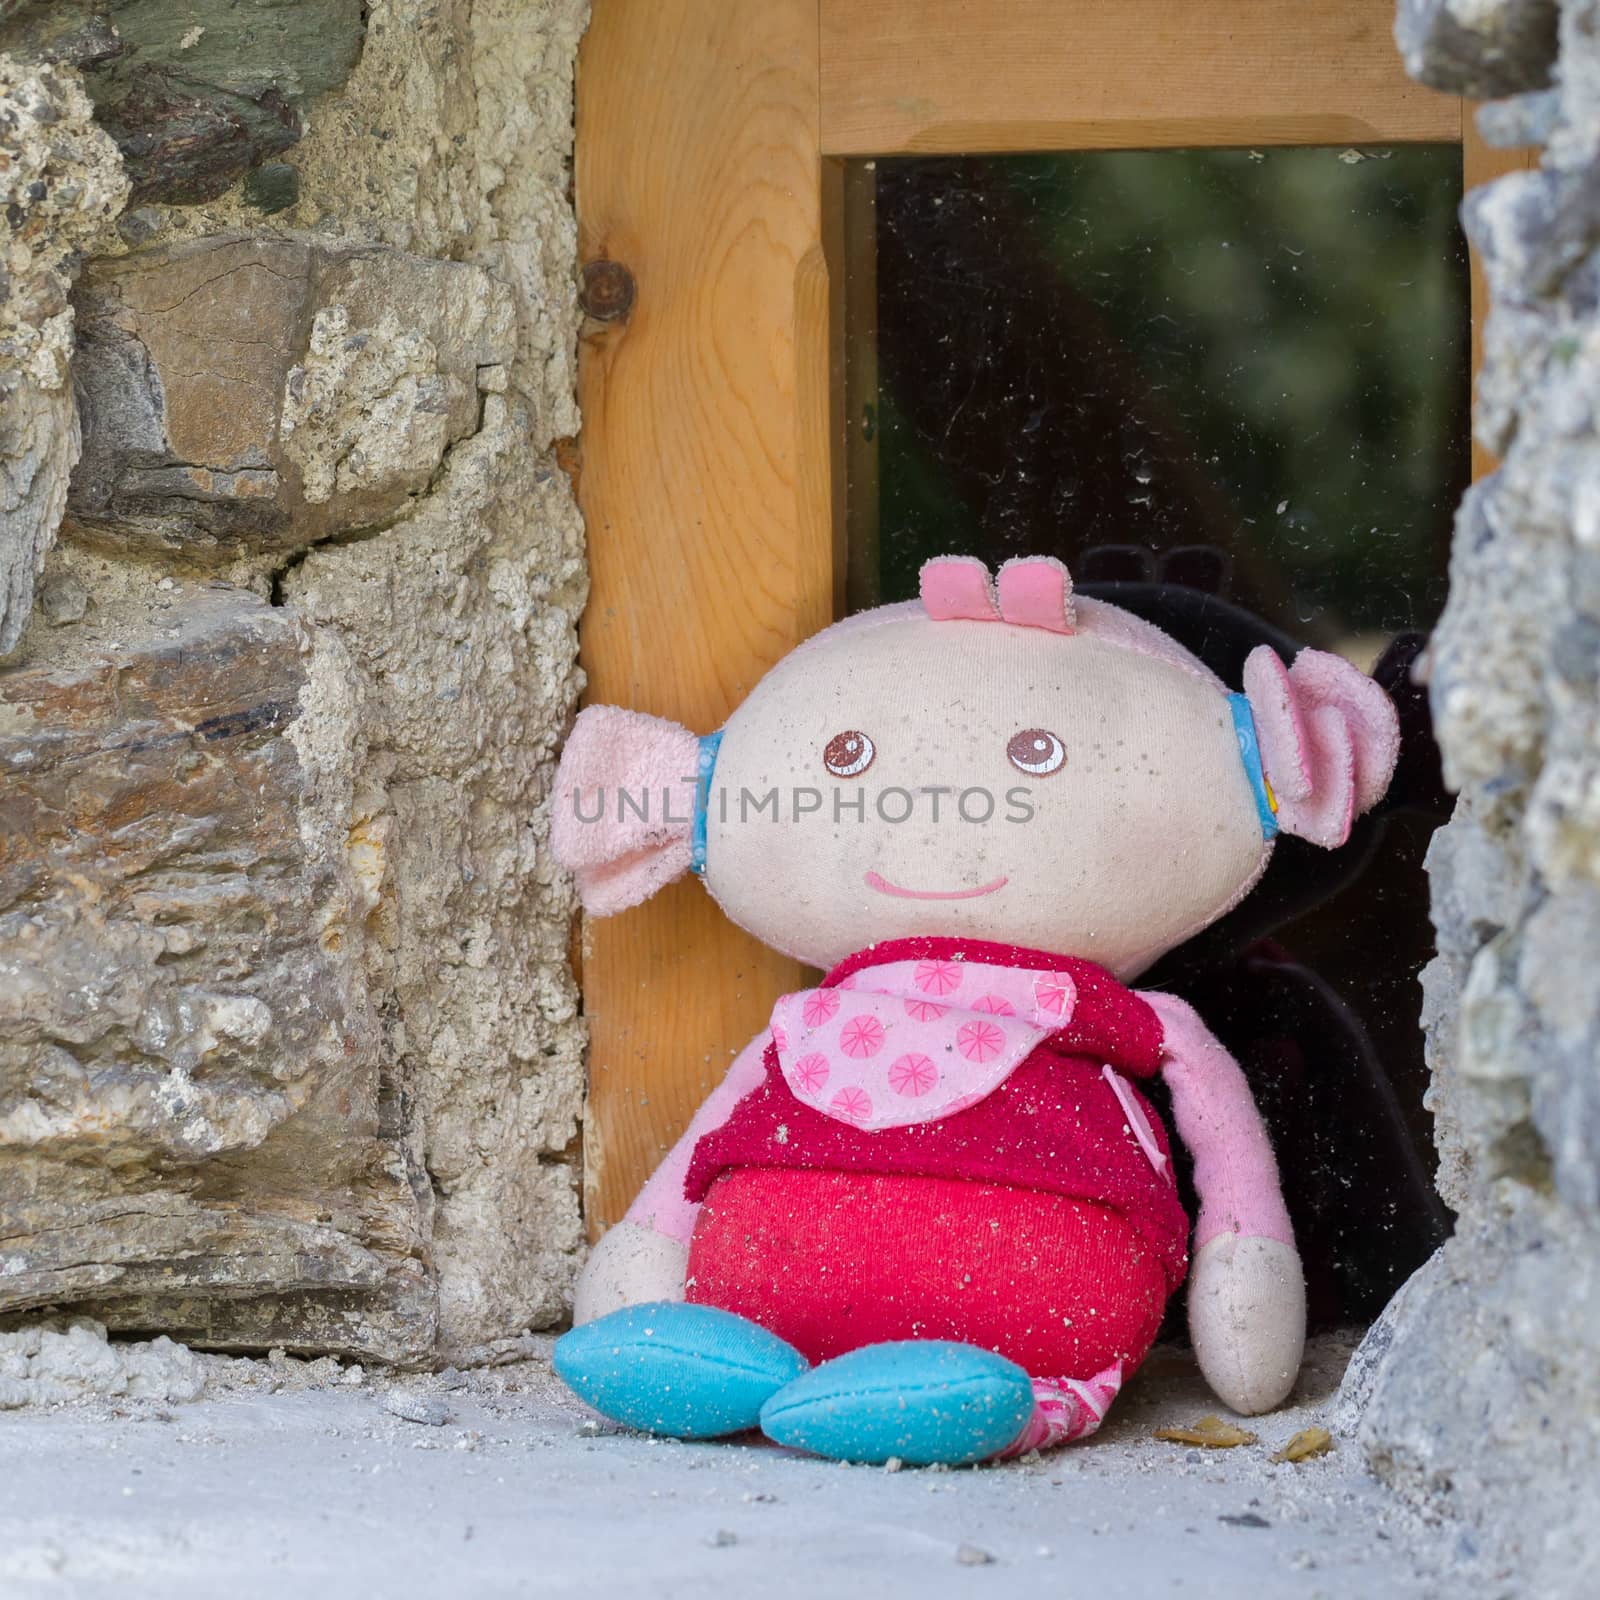 Old stuffed doll sitting in front of a window